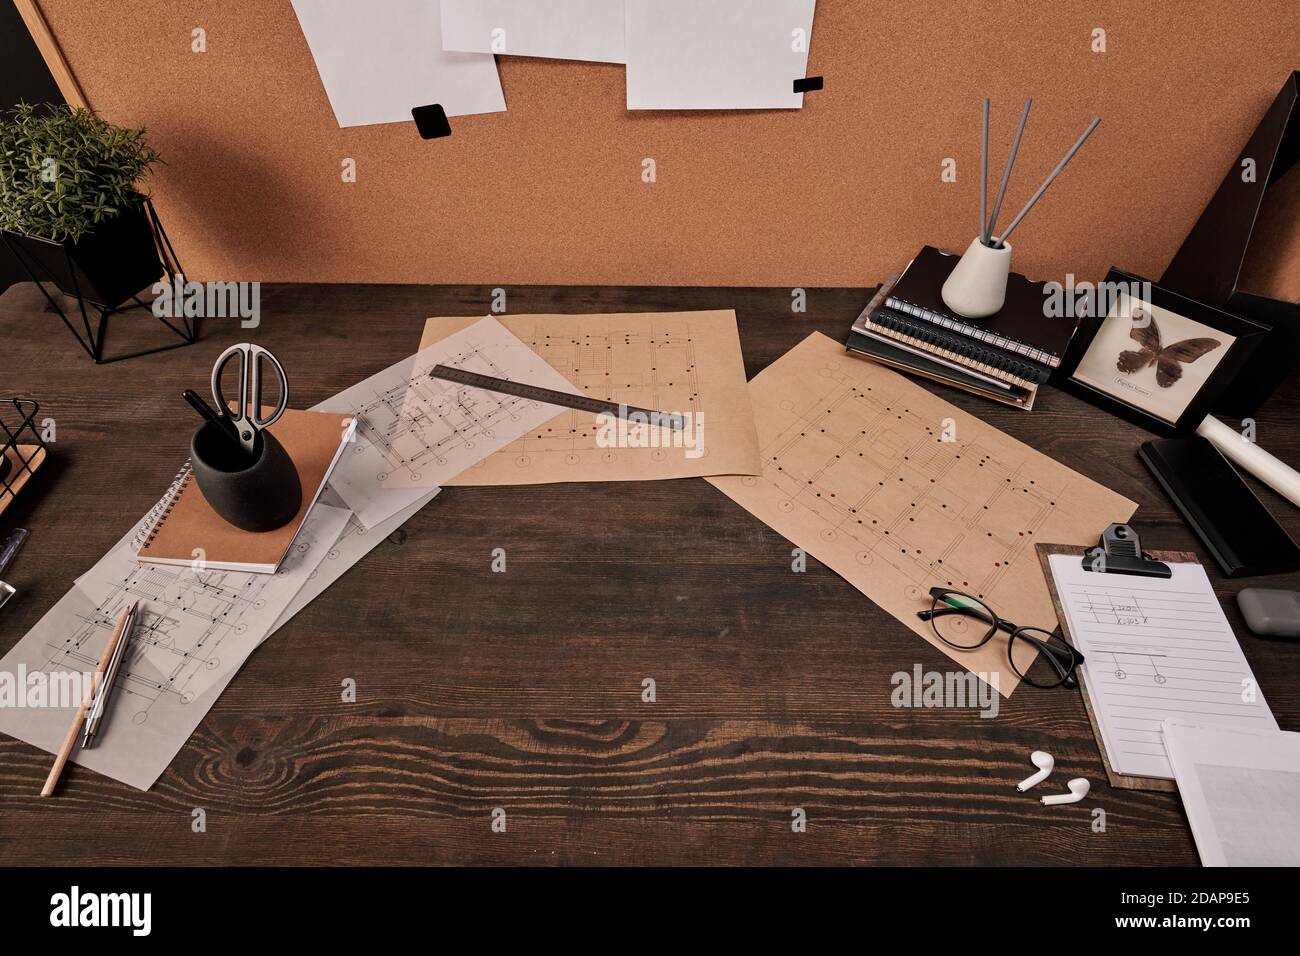 Blueprints, copybooks and office supplies surrounding copyspace on wooden table Stock Photo